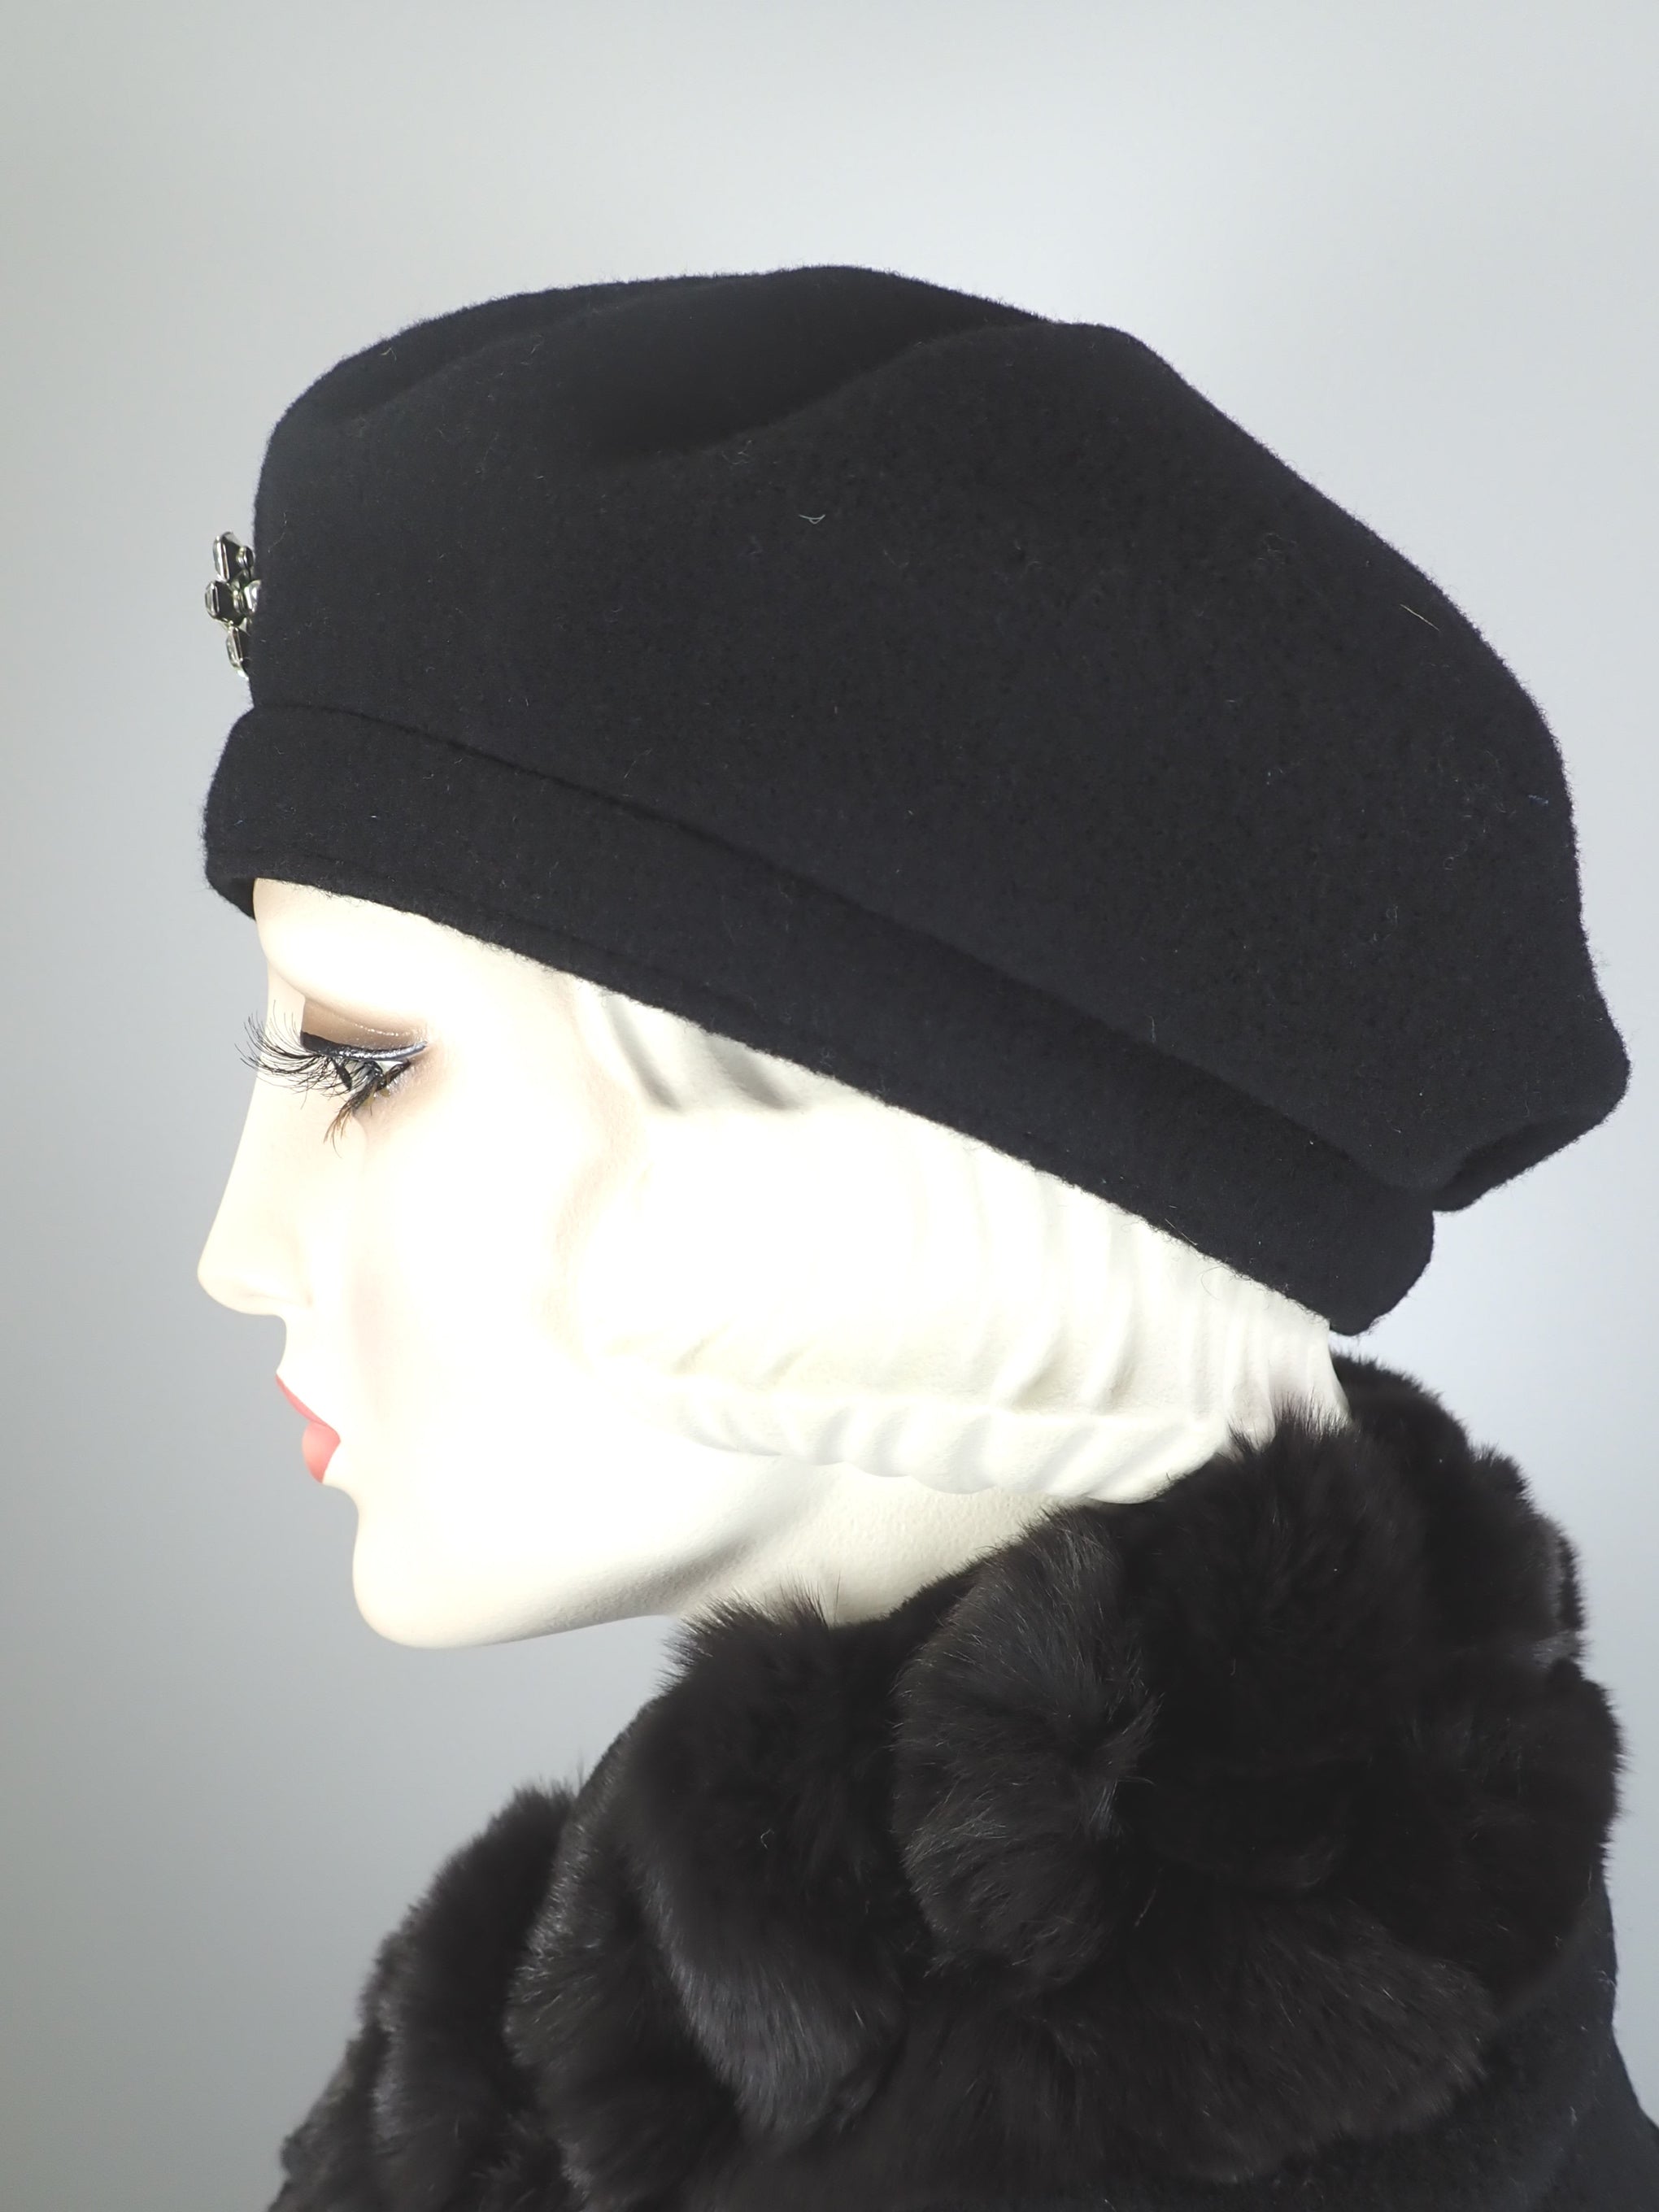 Women's winter wool felt black and white beret. Upcycled sustainable womens beret hat. Hand embellished one of a kind hat.